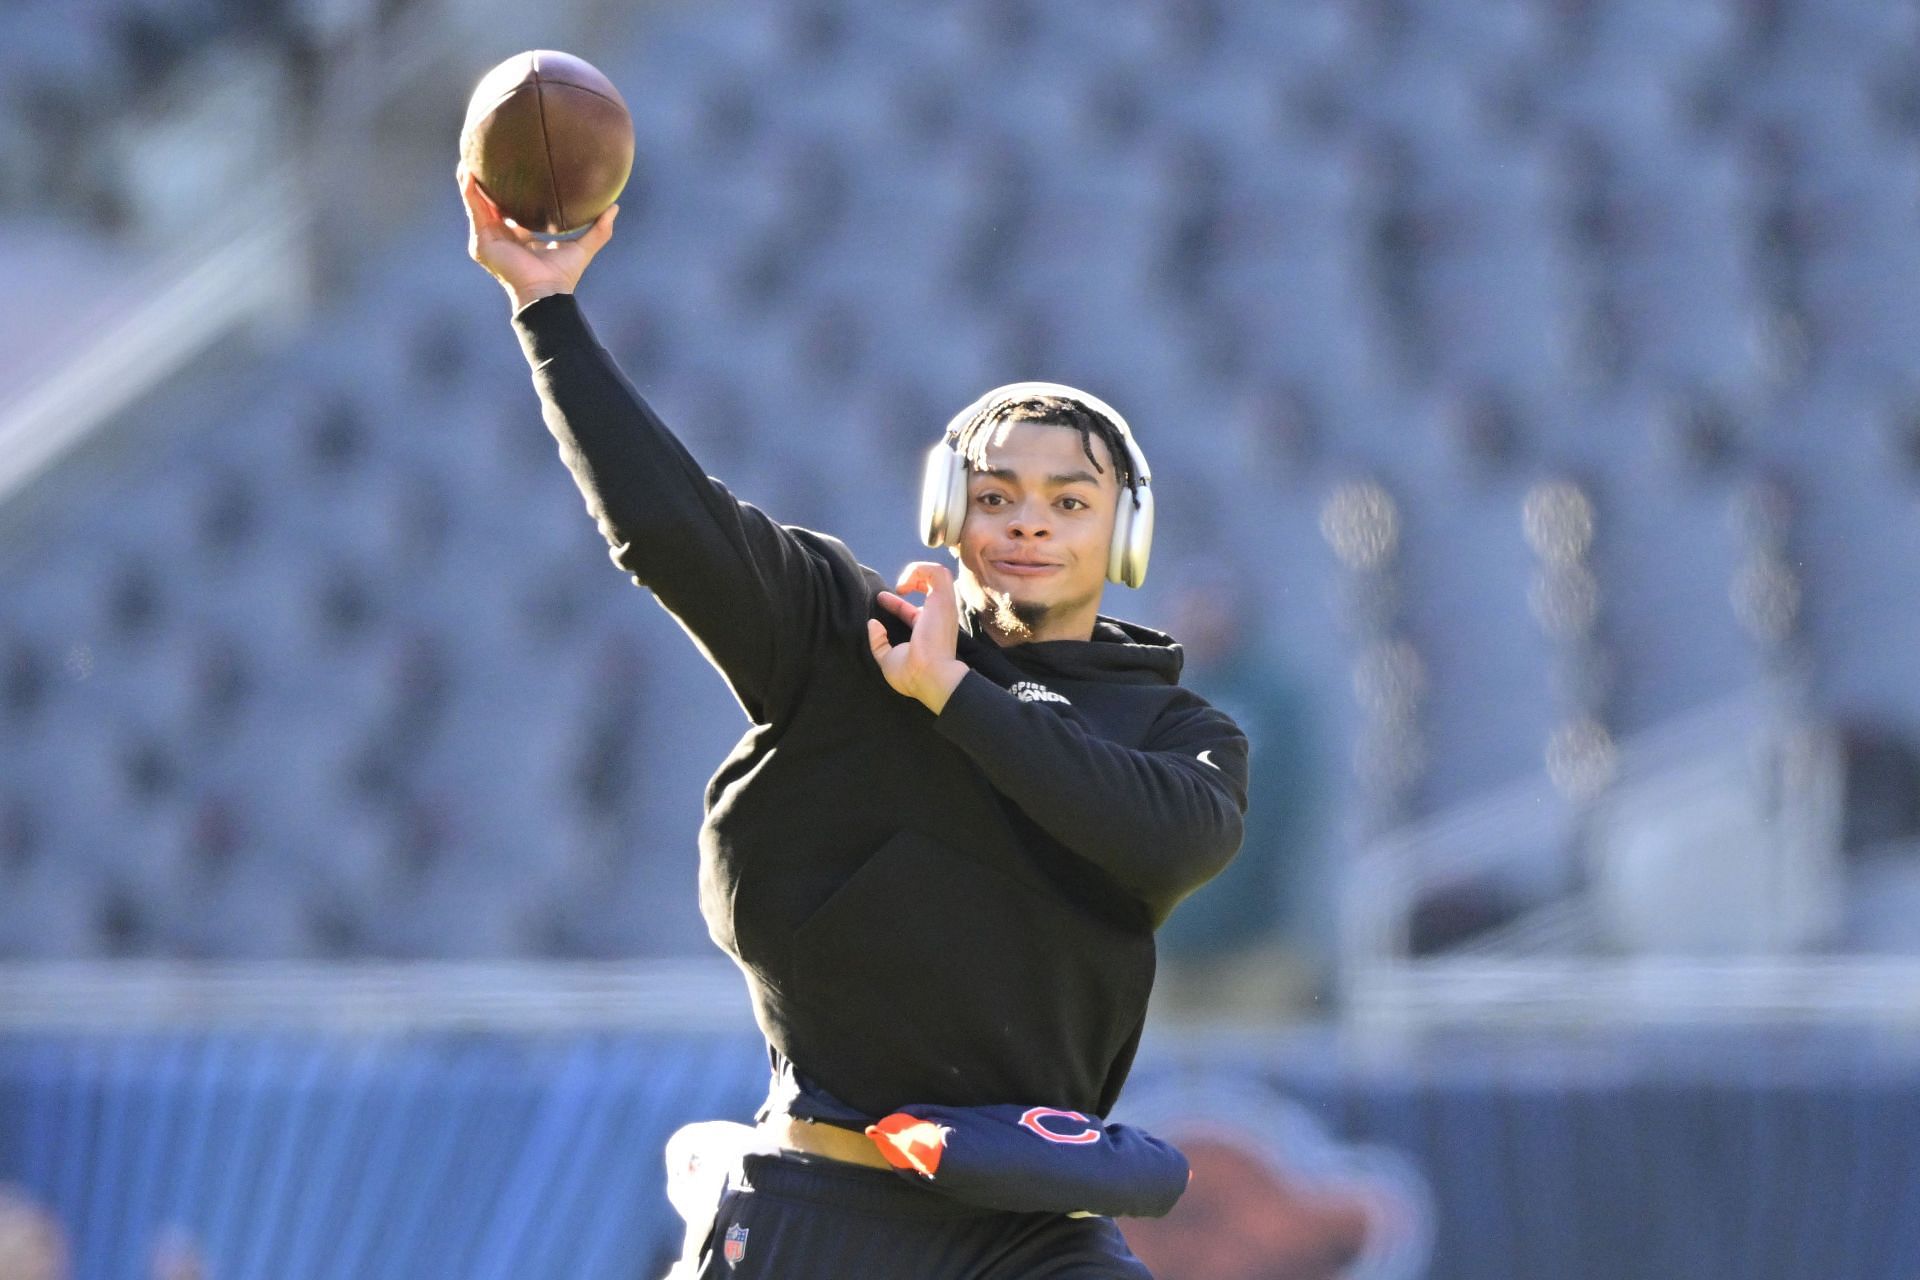 Justin Fields of the Chicago Bears warms up prior to a game against the Philadelphia Eagles